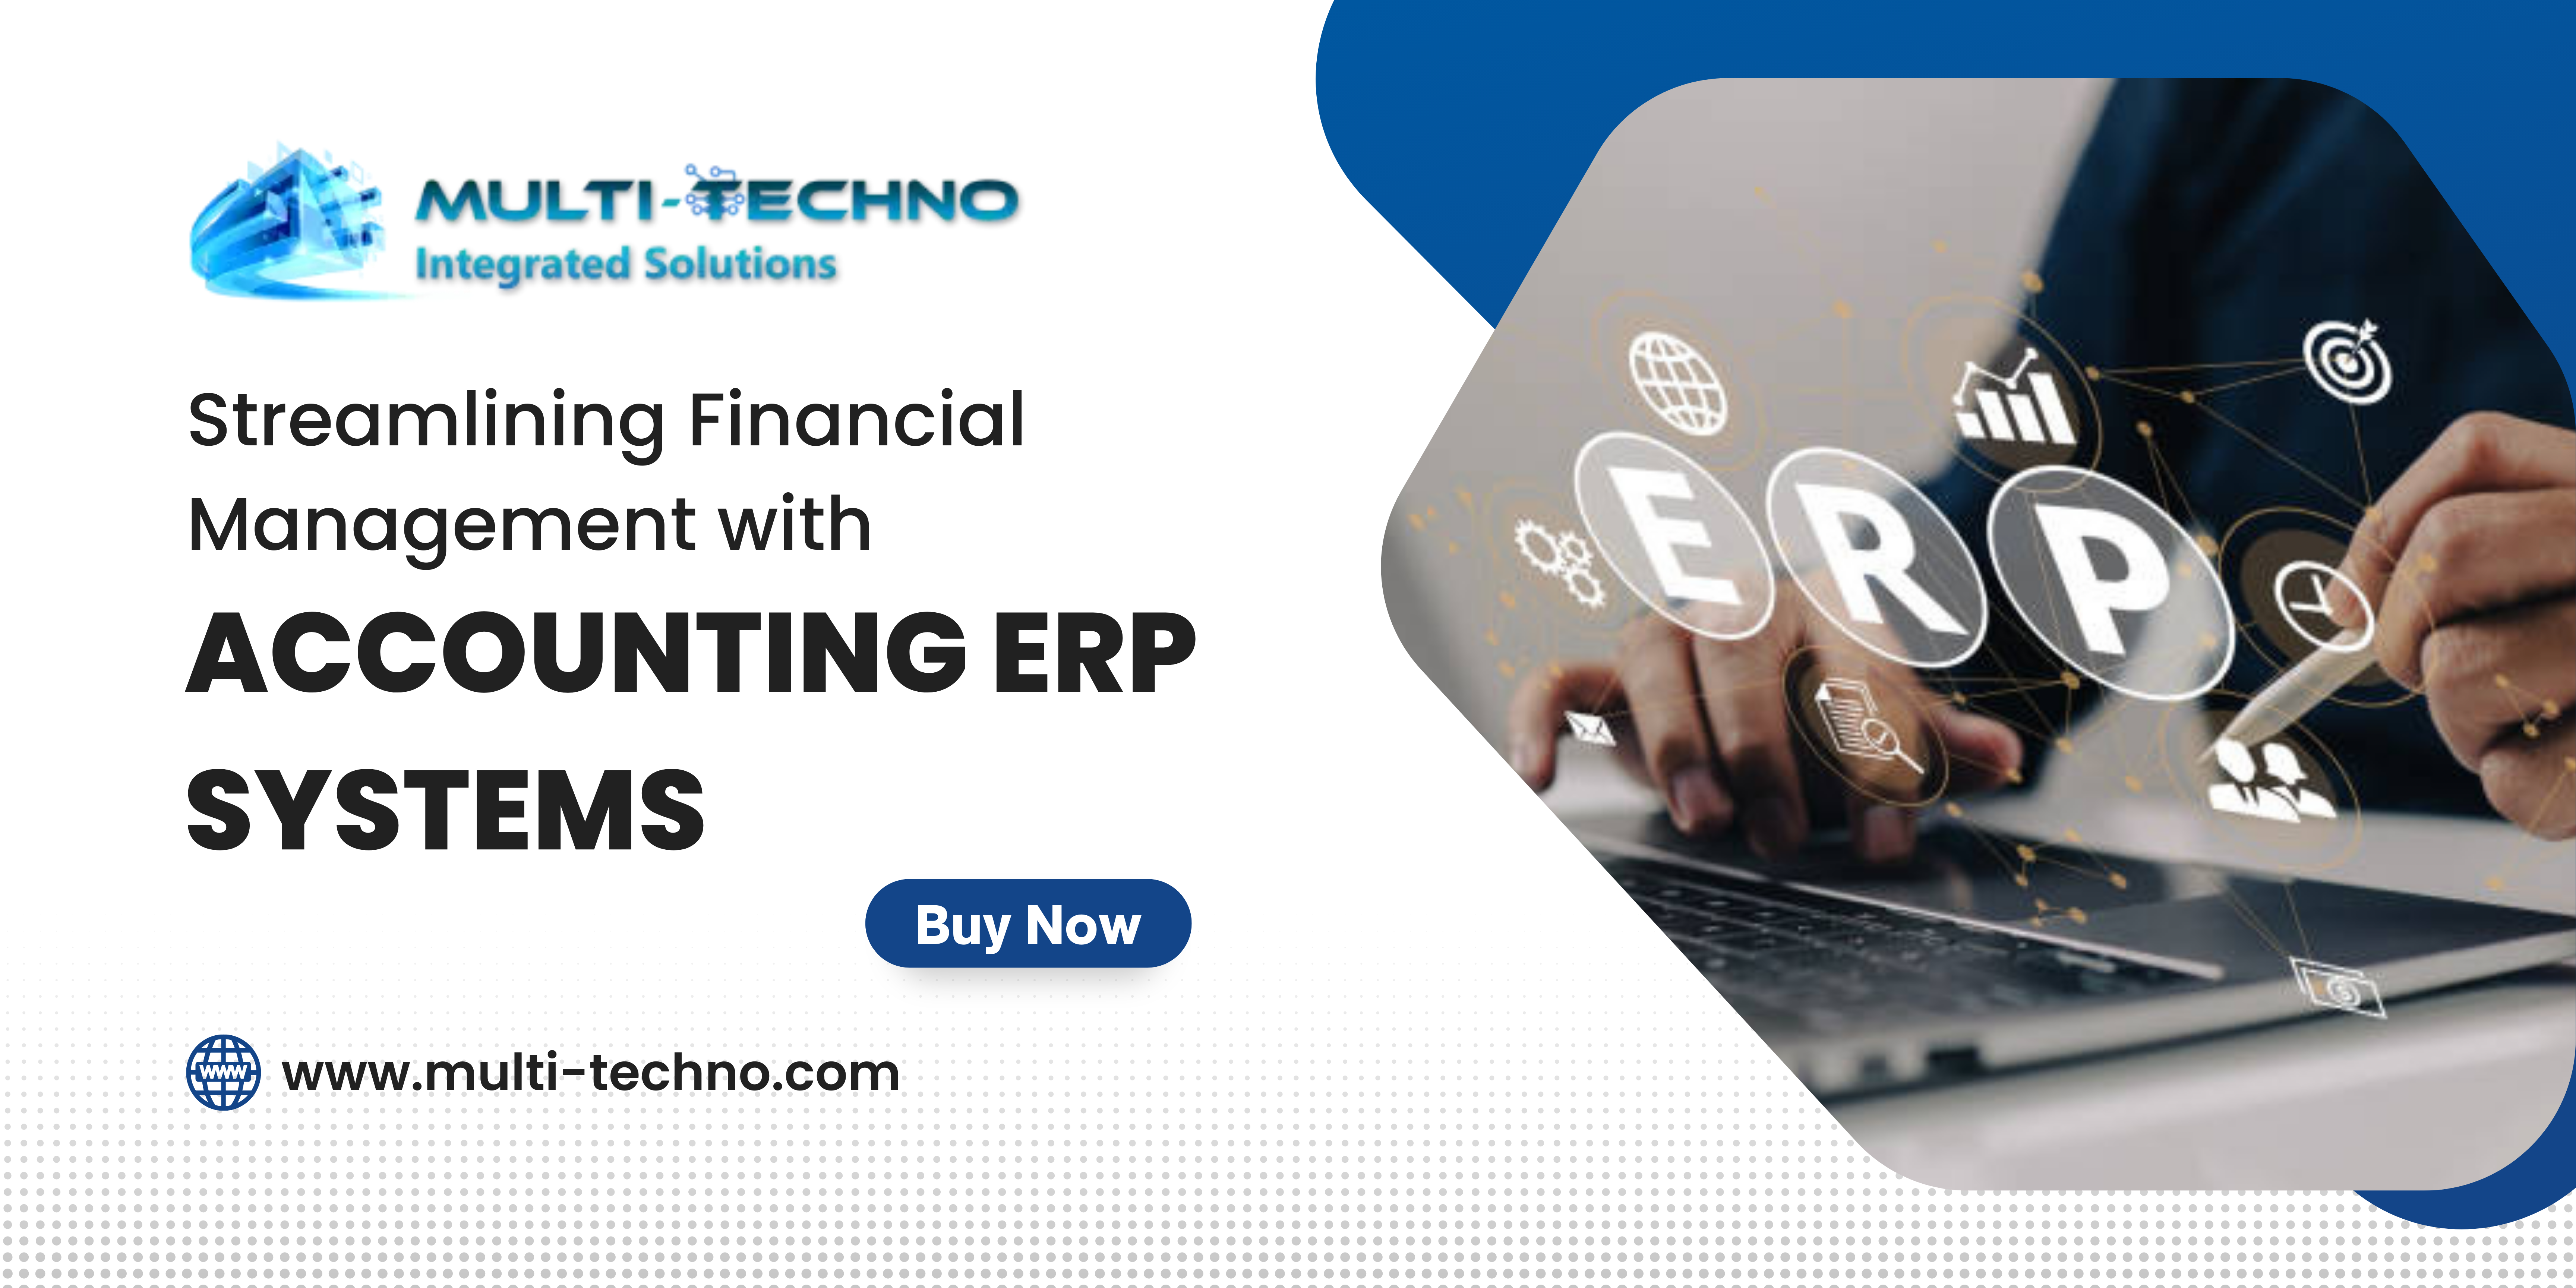 Accounting ERP Systems - Multi-Techno